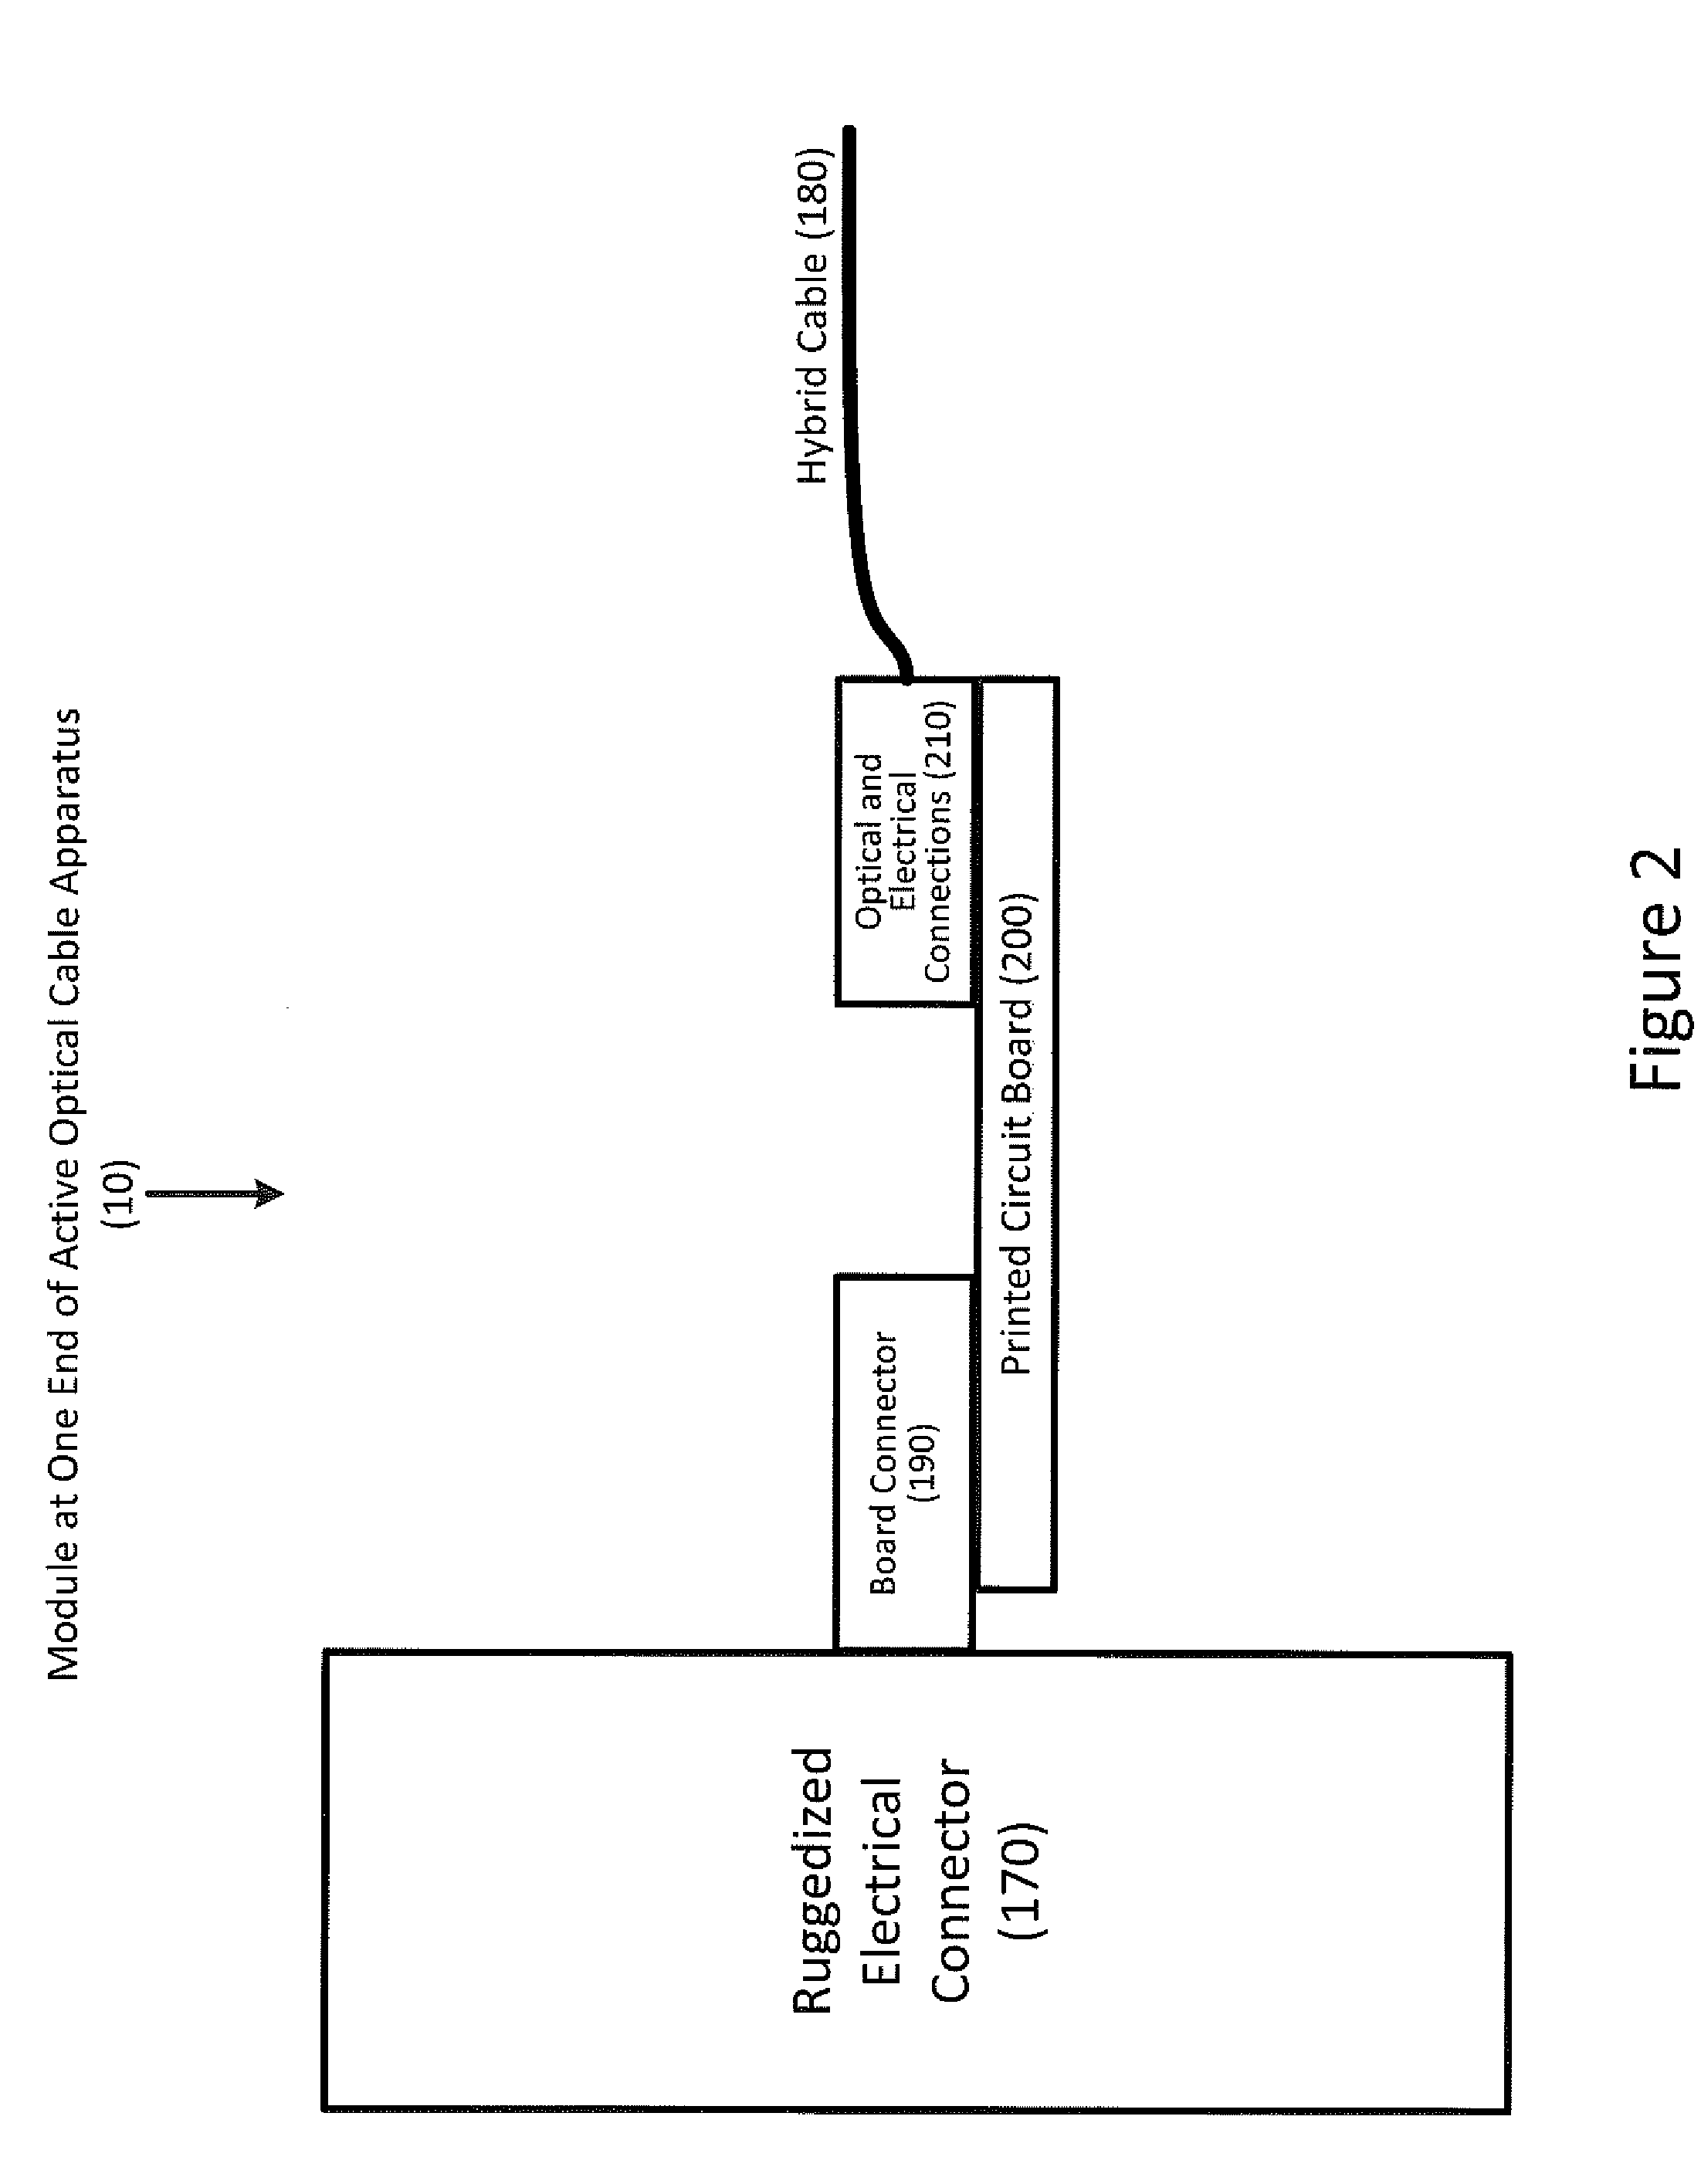 Apparatus for modular implementation of multi-function active optical cables